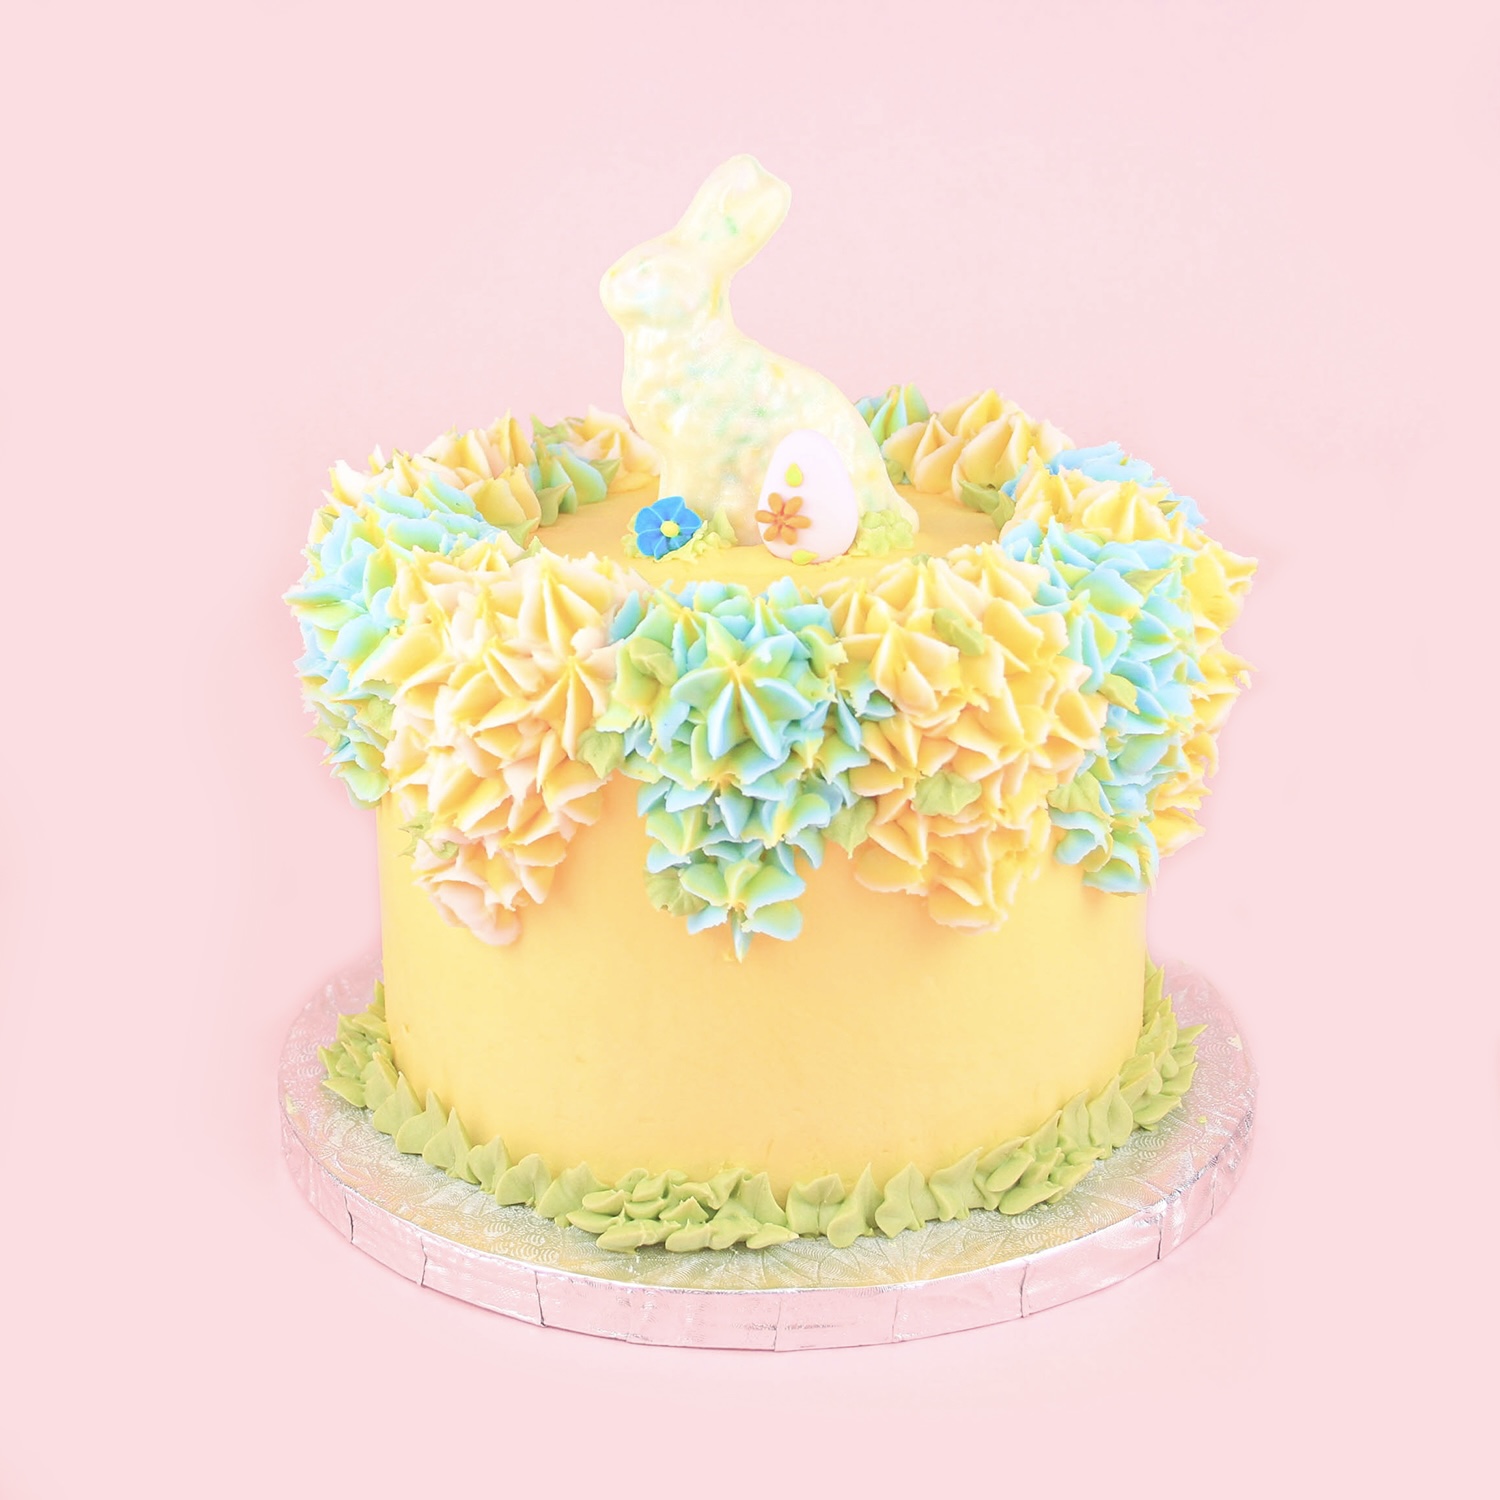 Chocolate Molded Easter Bunny cake with cascading hydrangeas in buttercream